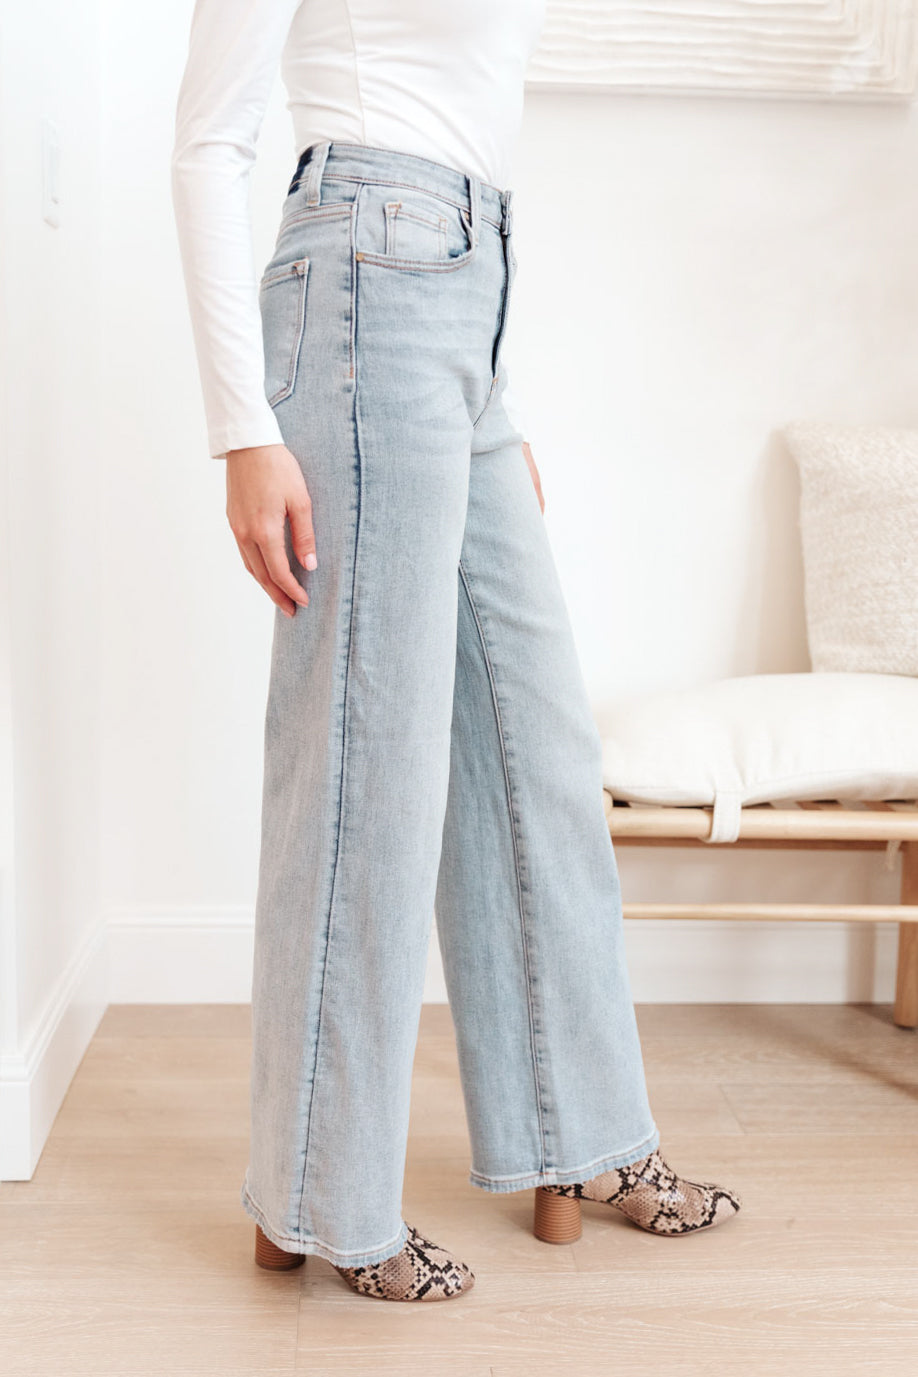 FREE PEOPLE MVOEMENT BLISSED OUT WIDE LEG PANTS - CACTUS FLOWER